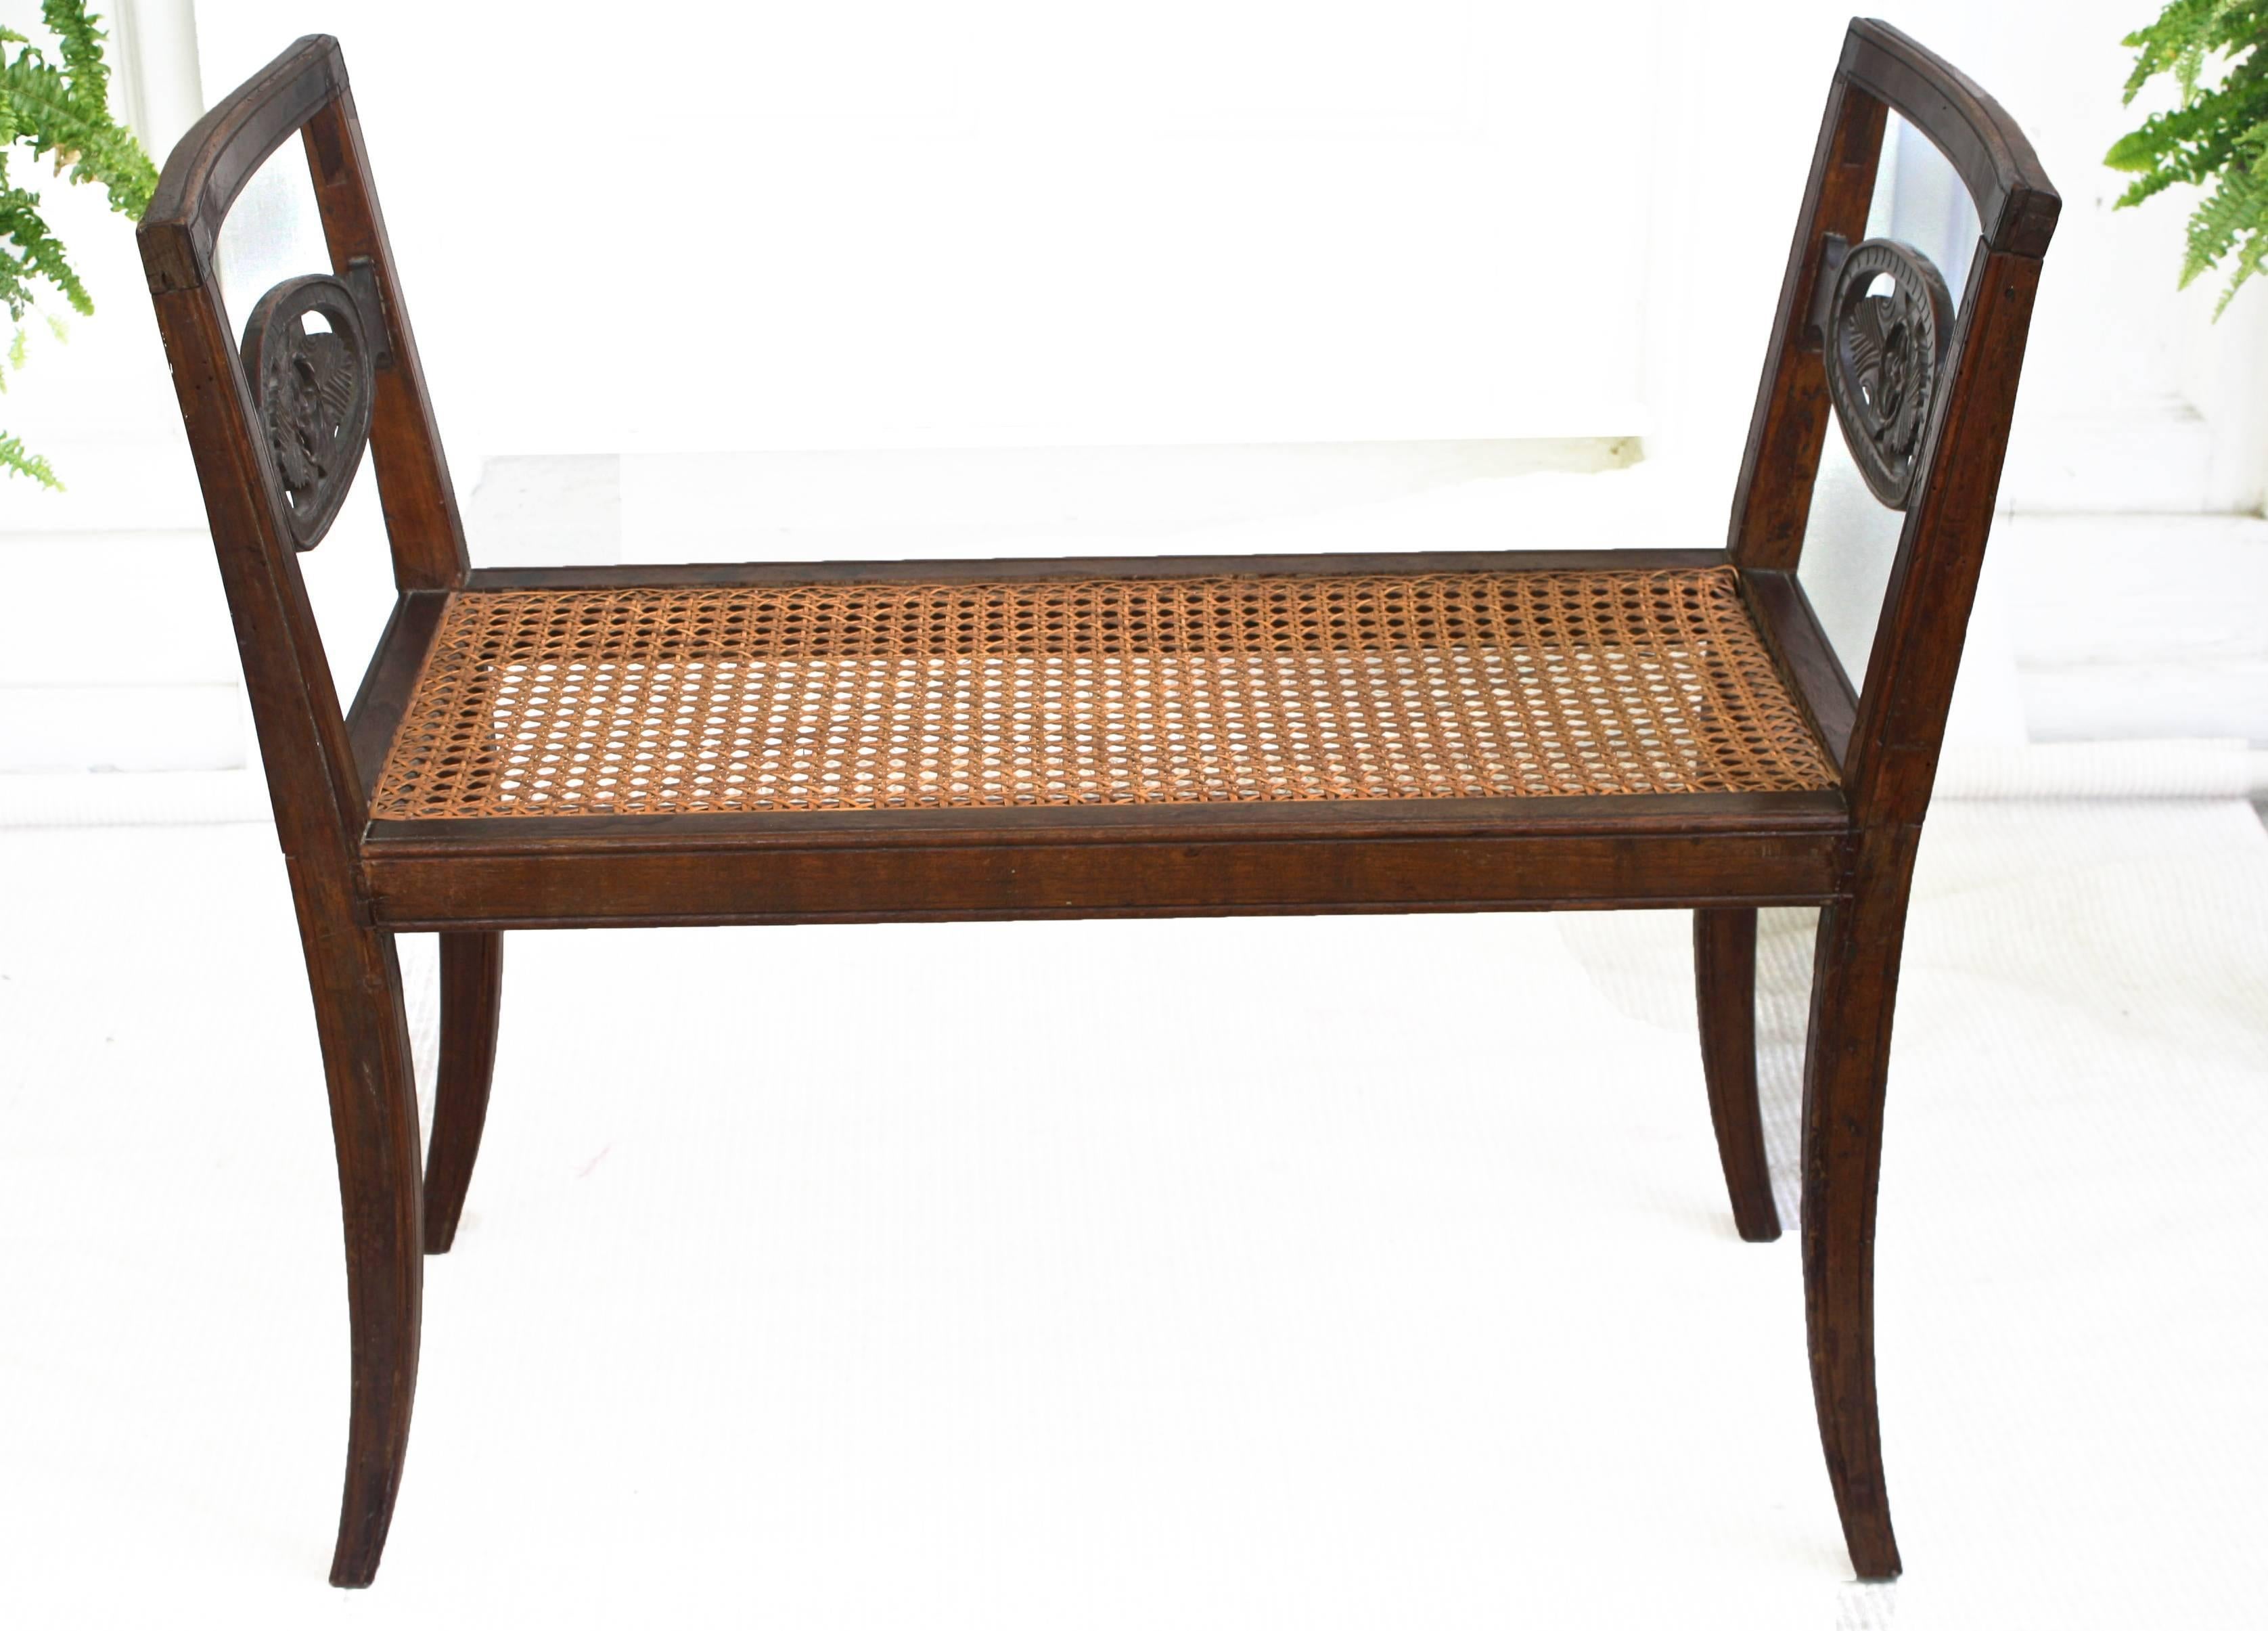 A mahogany framed and cane-seated window bench with splayed legs; the side
arm supports flare slightly and are centred with foliate-carved oval medallions.
Likely Florentine origin.